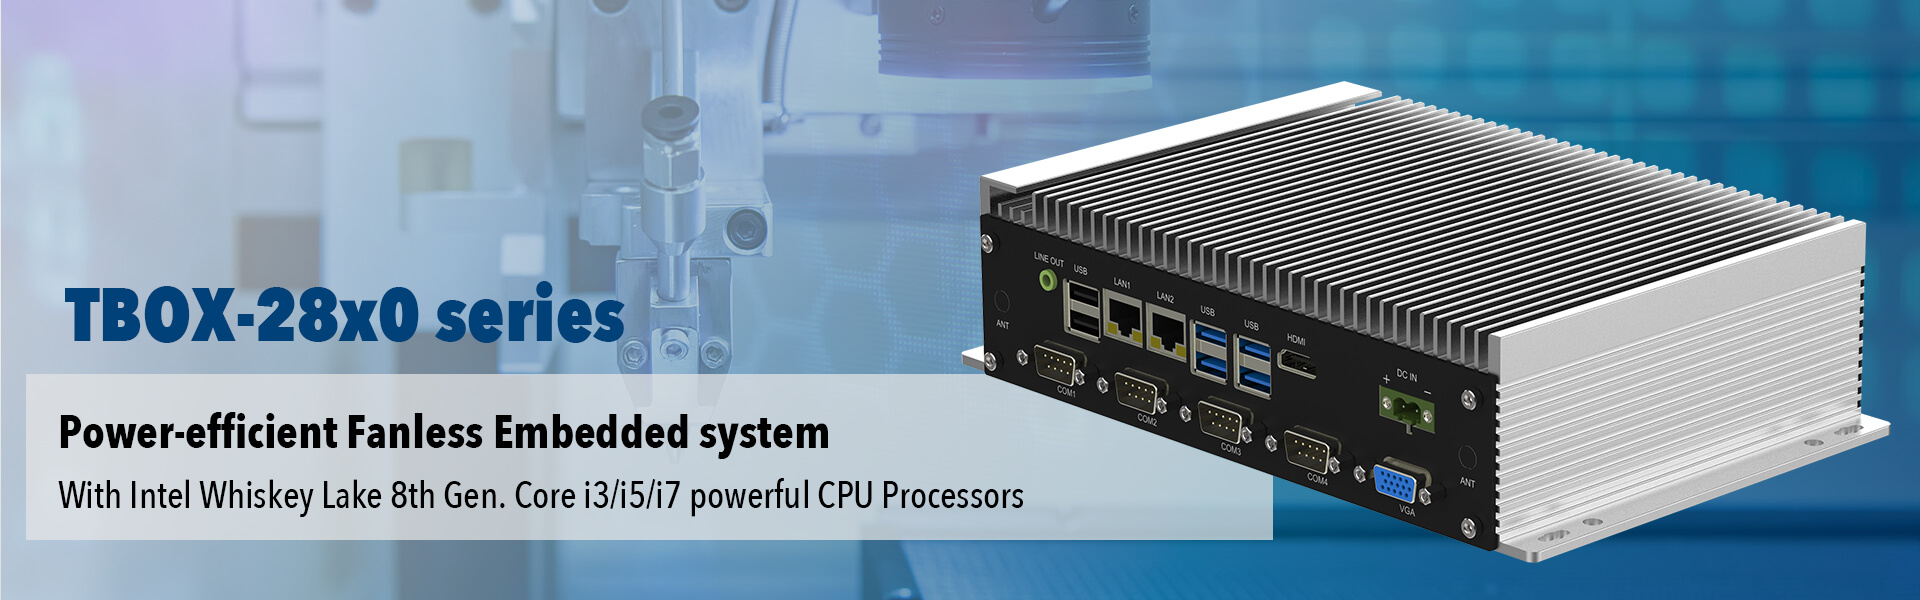 Power-efficient Fanless Embedded system